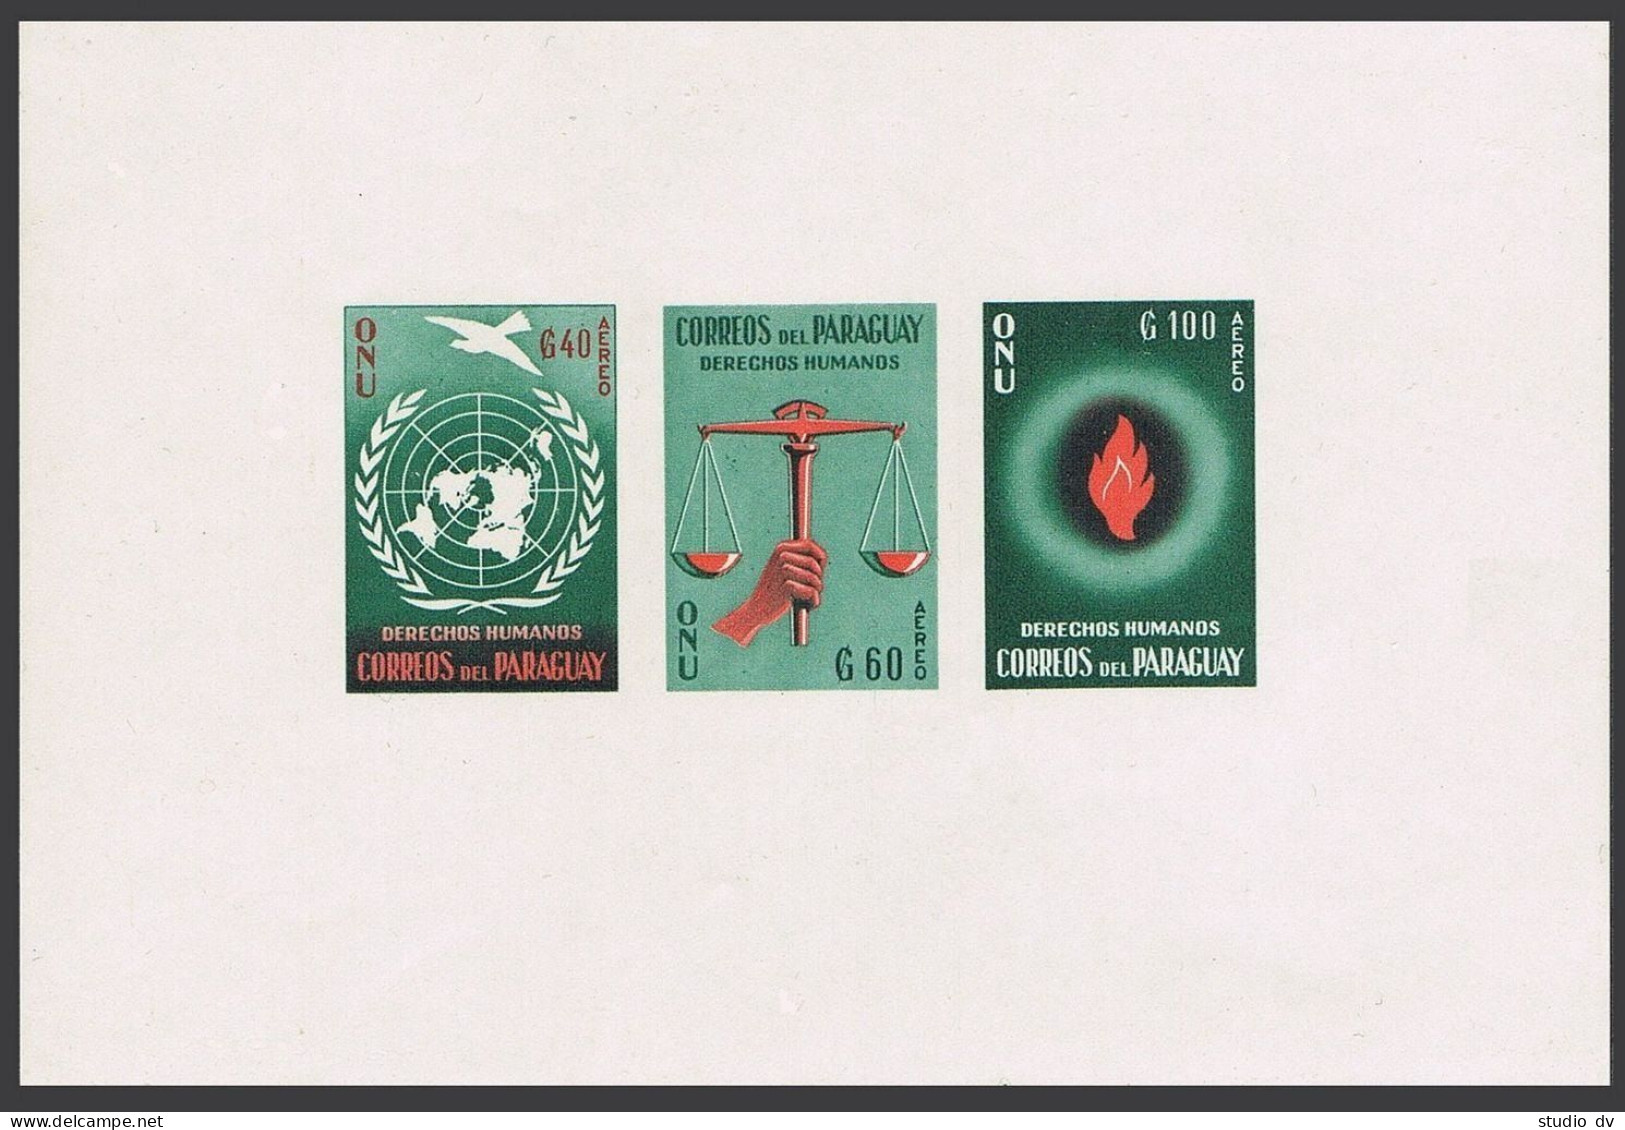 Paraguay 568a,C271a Perf,imperf, MNH. UN Declaration Of Human Rights, 1960.Dove. - Paraguay